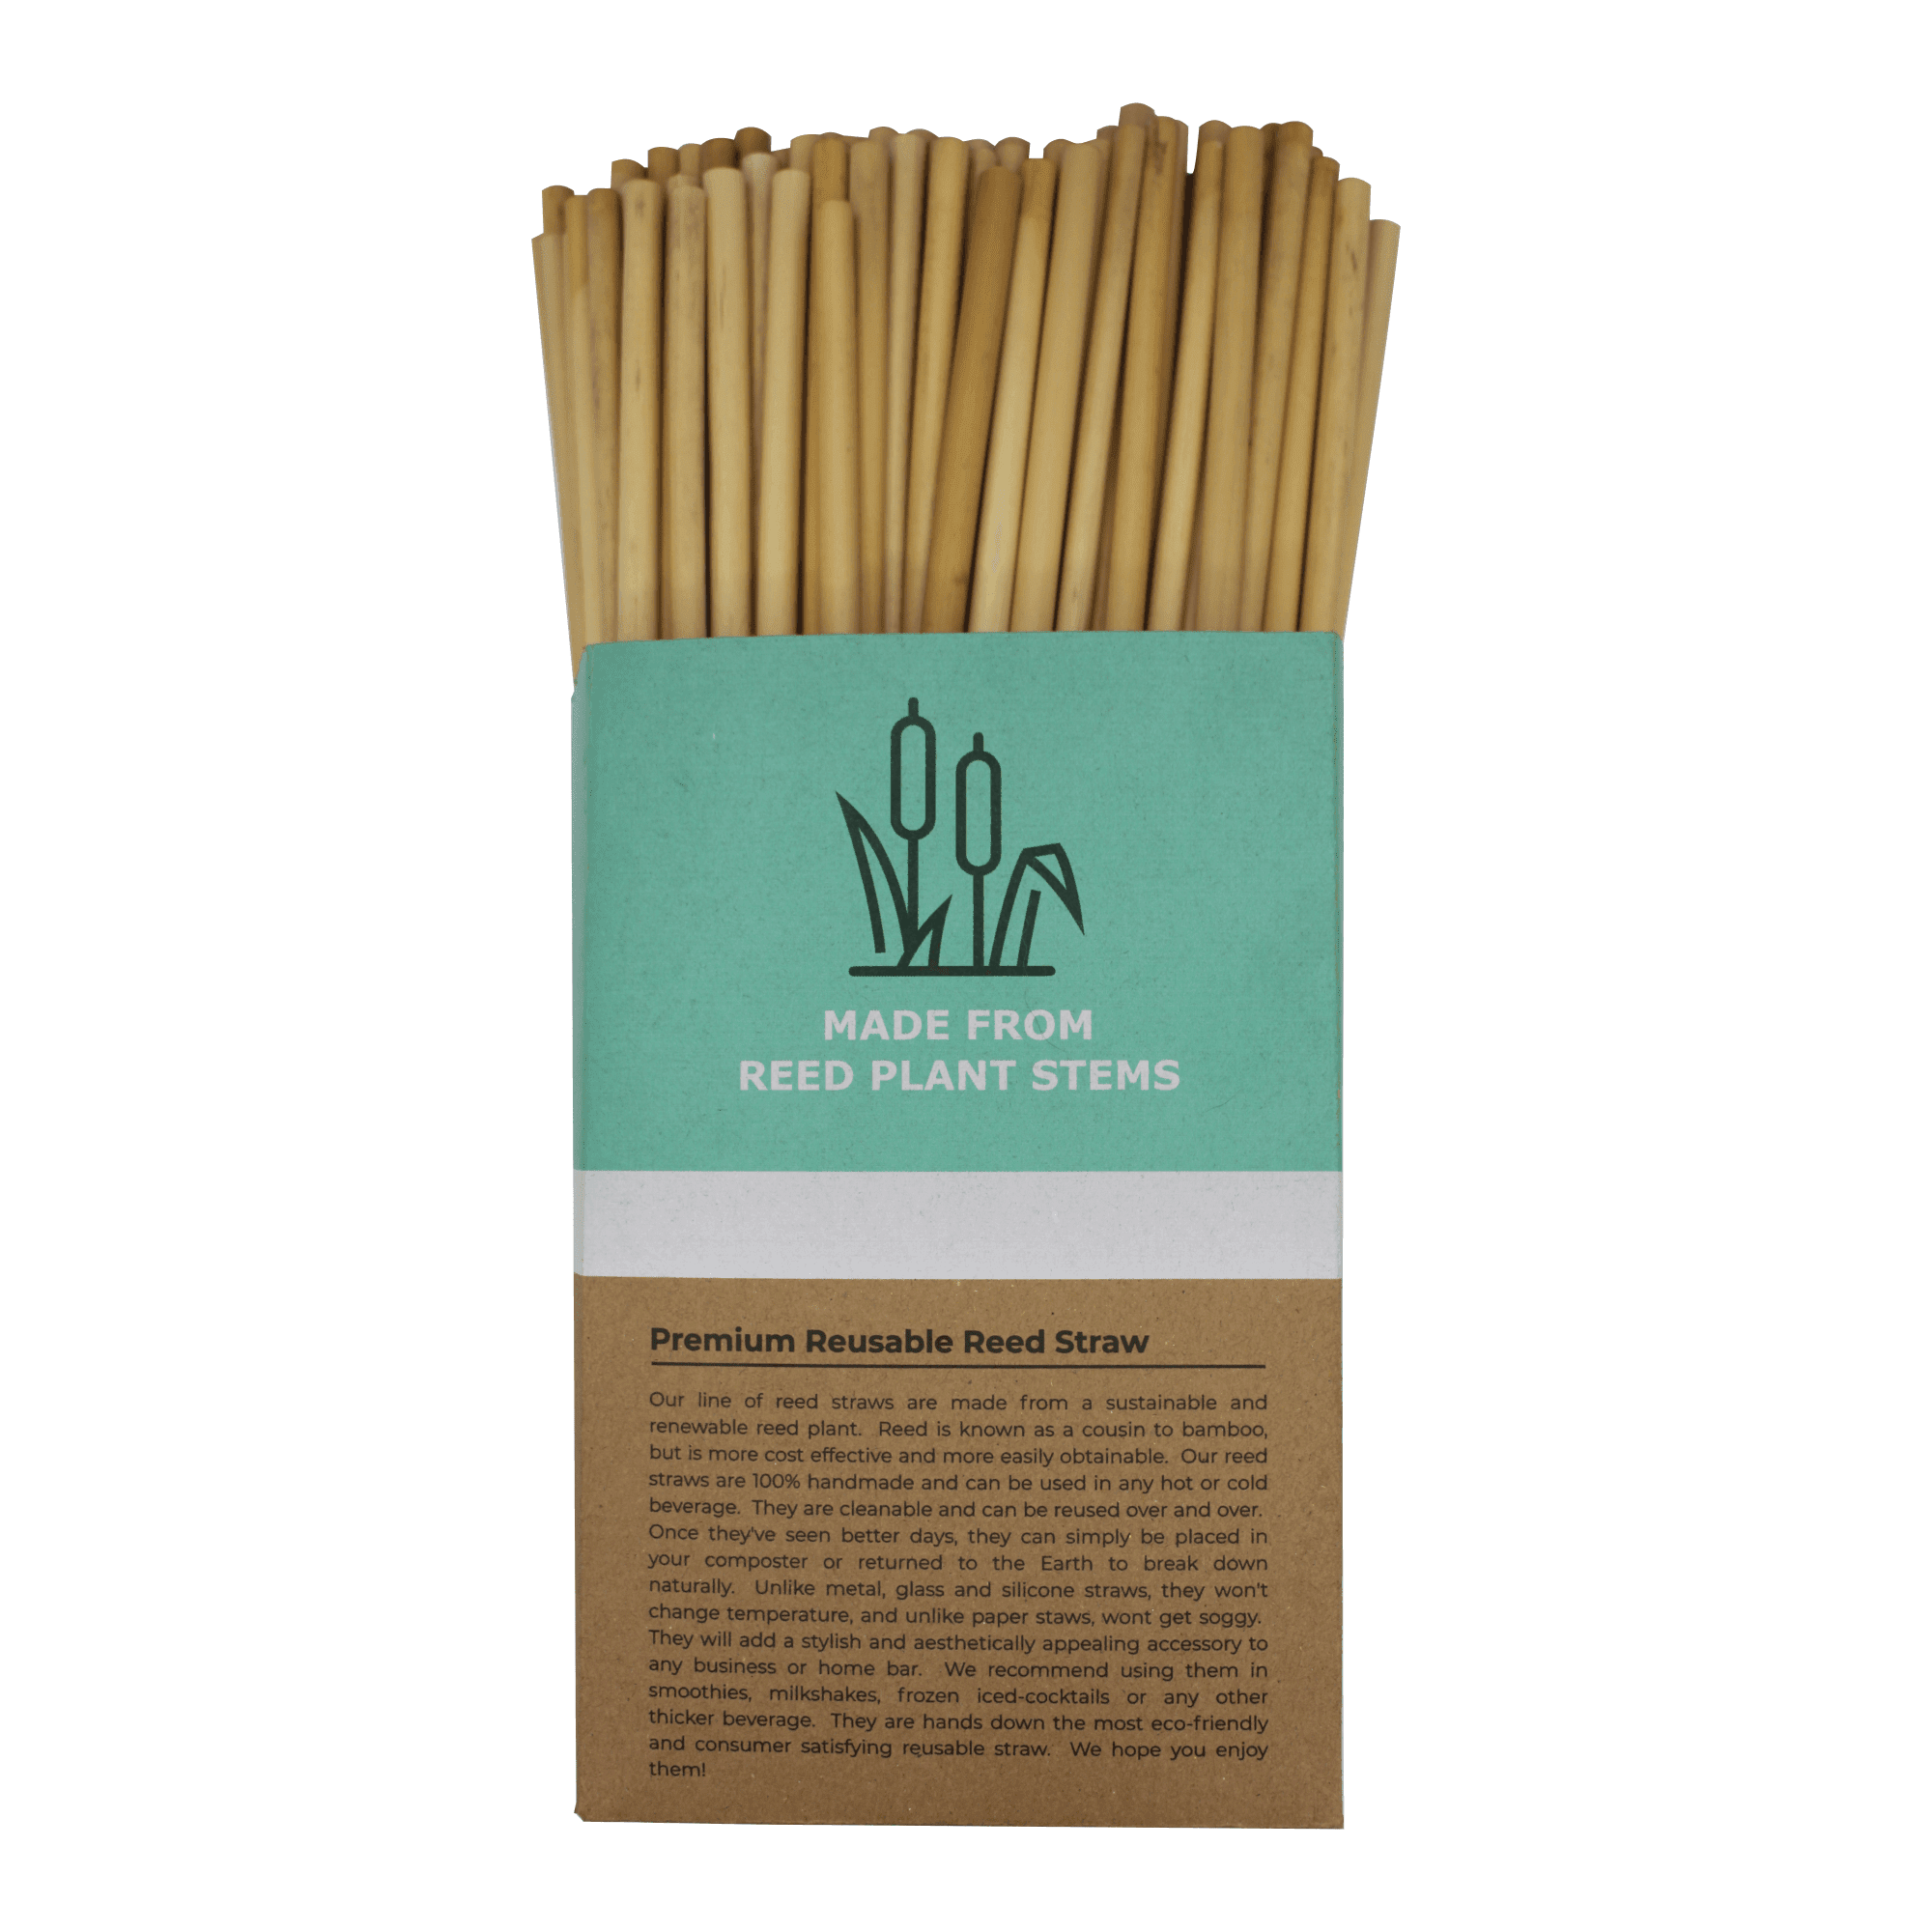 250 count box of Holy City Straw Company Reed Straws with Straws coming out of the box